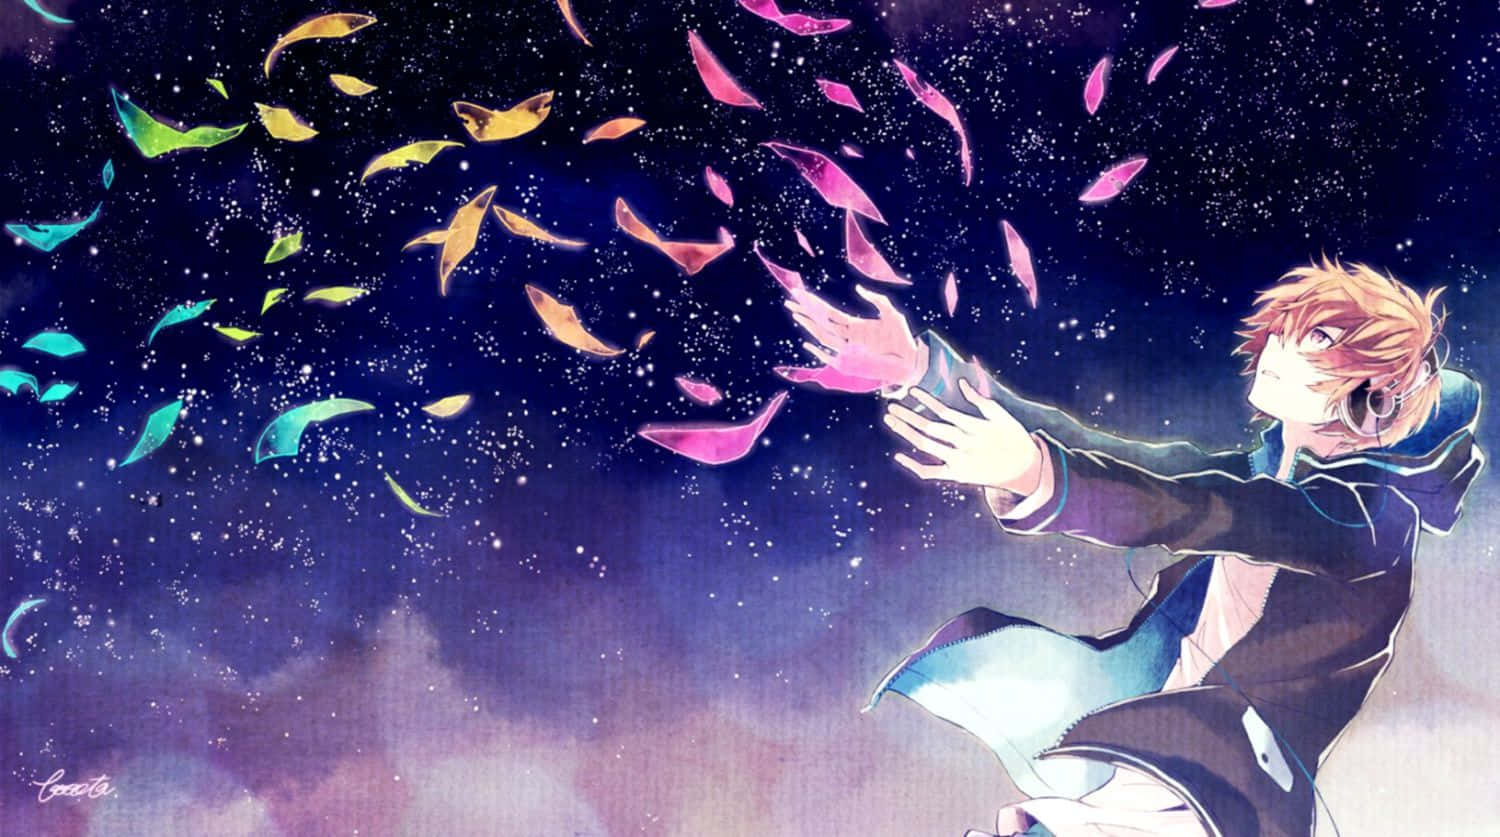 Anime Blue Boy With Colorful Feathers Wallpaper